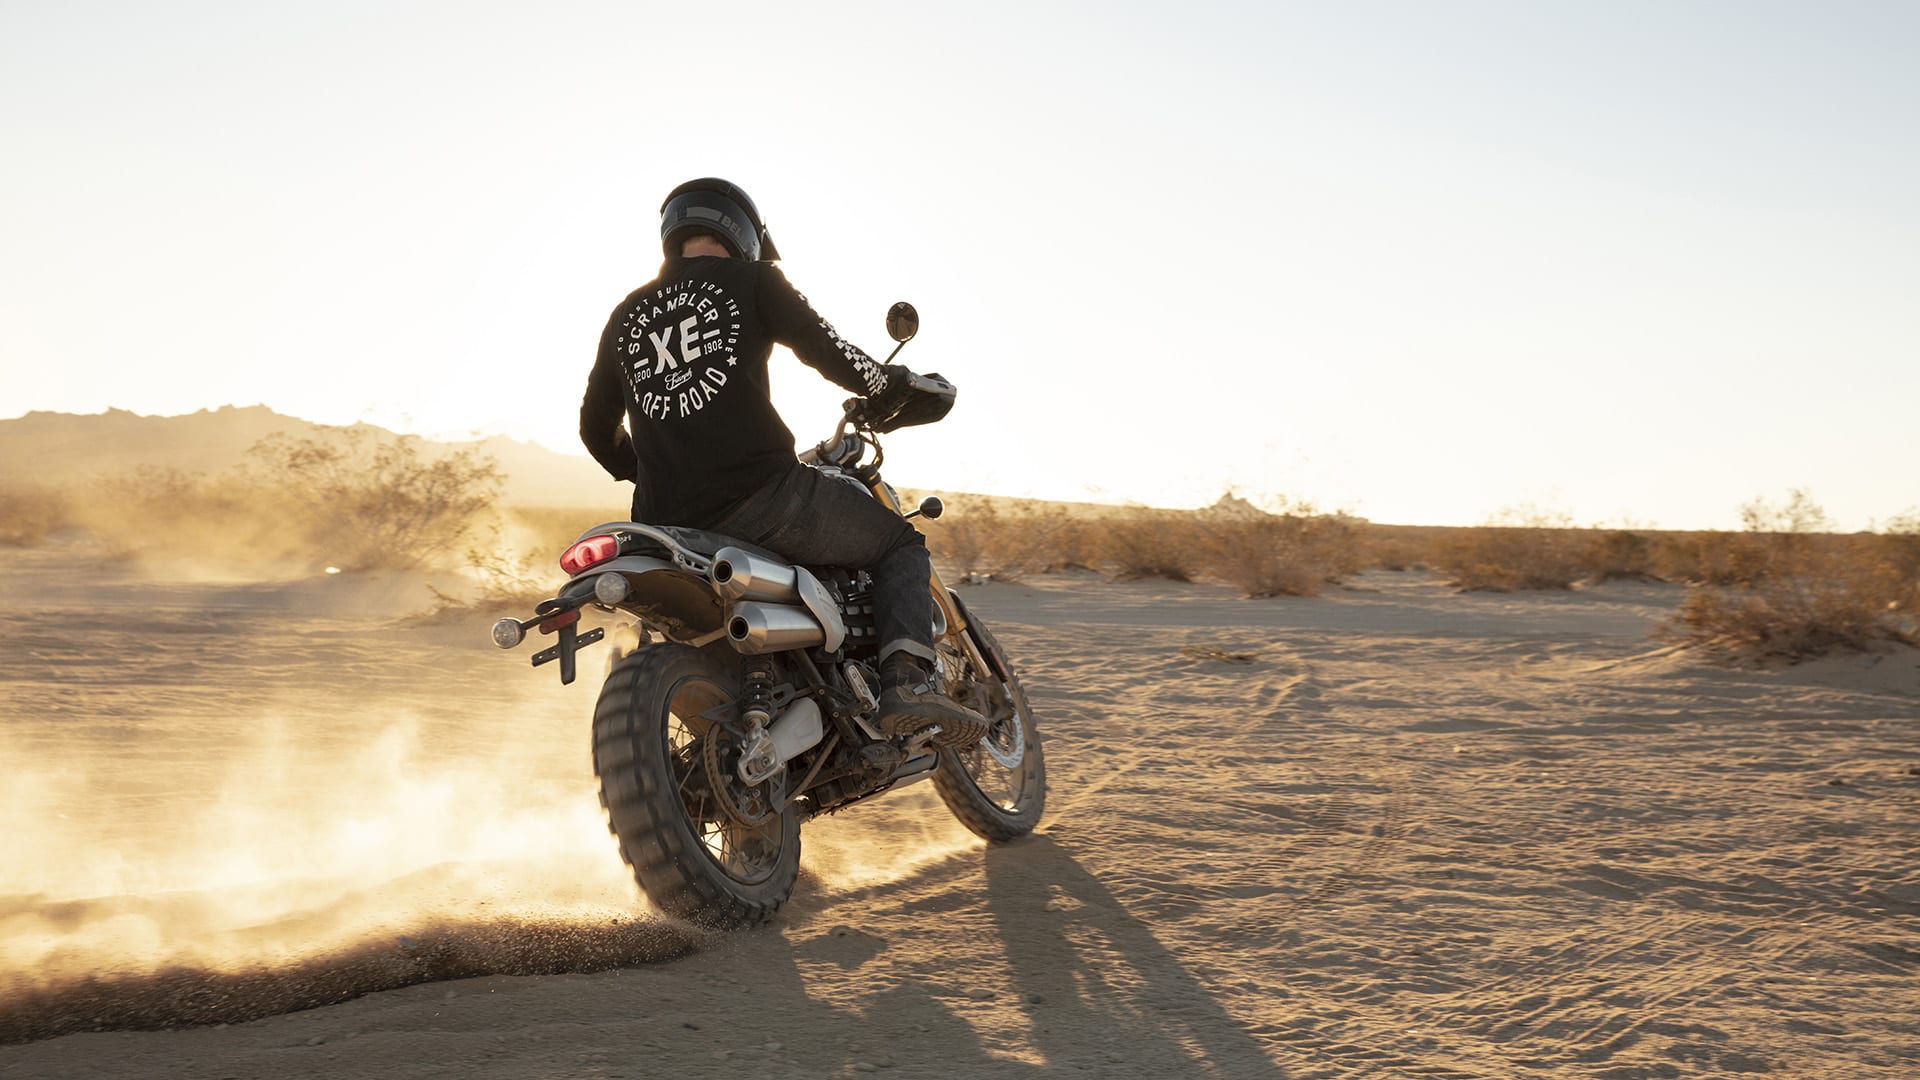 Innovative Triumph Scrambler 1200 scrambling along a salt flat in thrilling style, with the rider wearing the limited edition Scrambler 1200 clothing collection and Triumph dirt boots